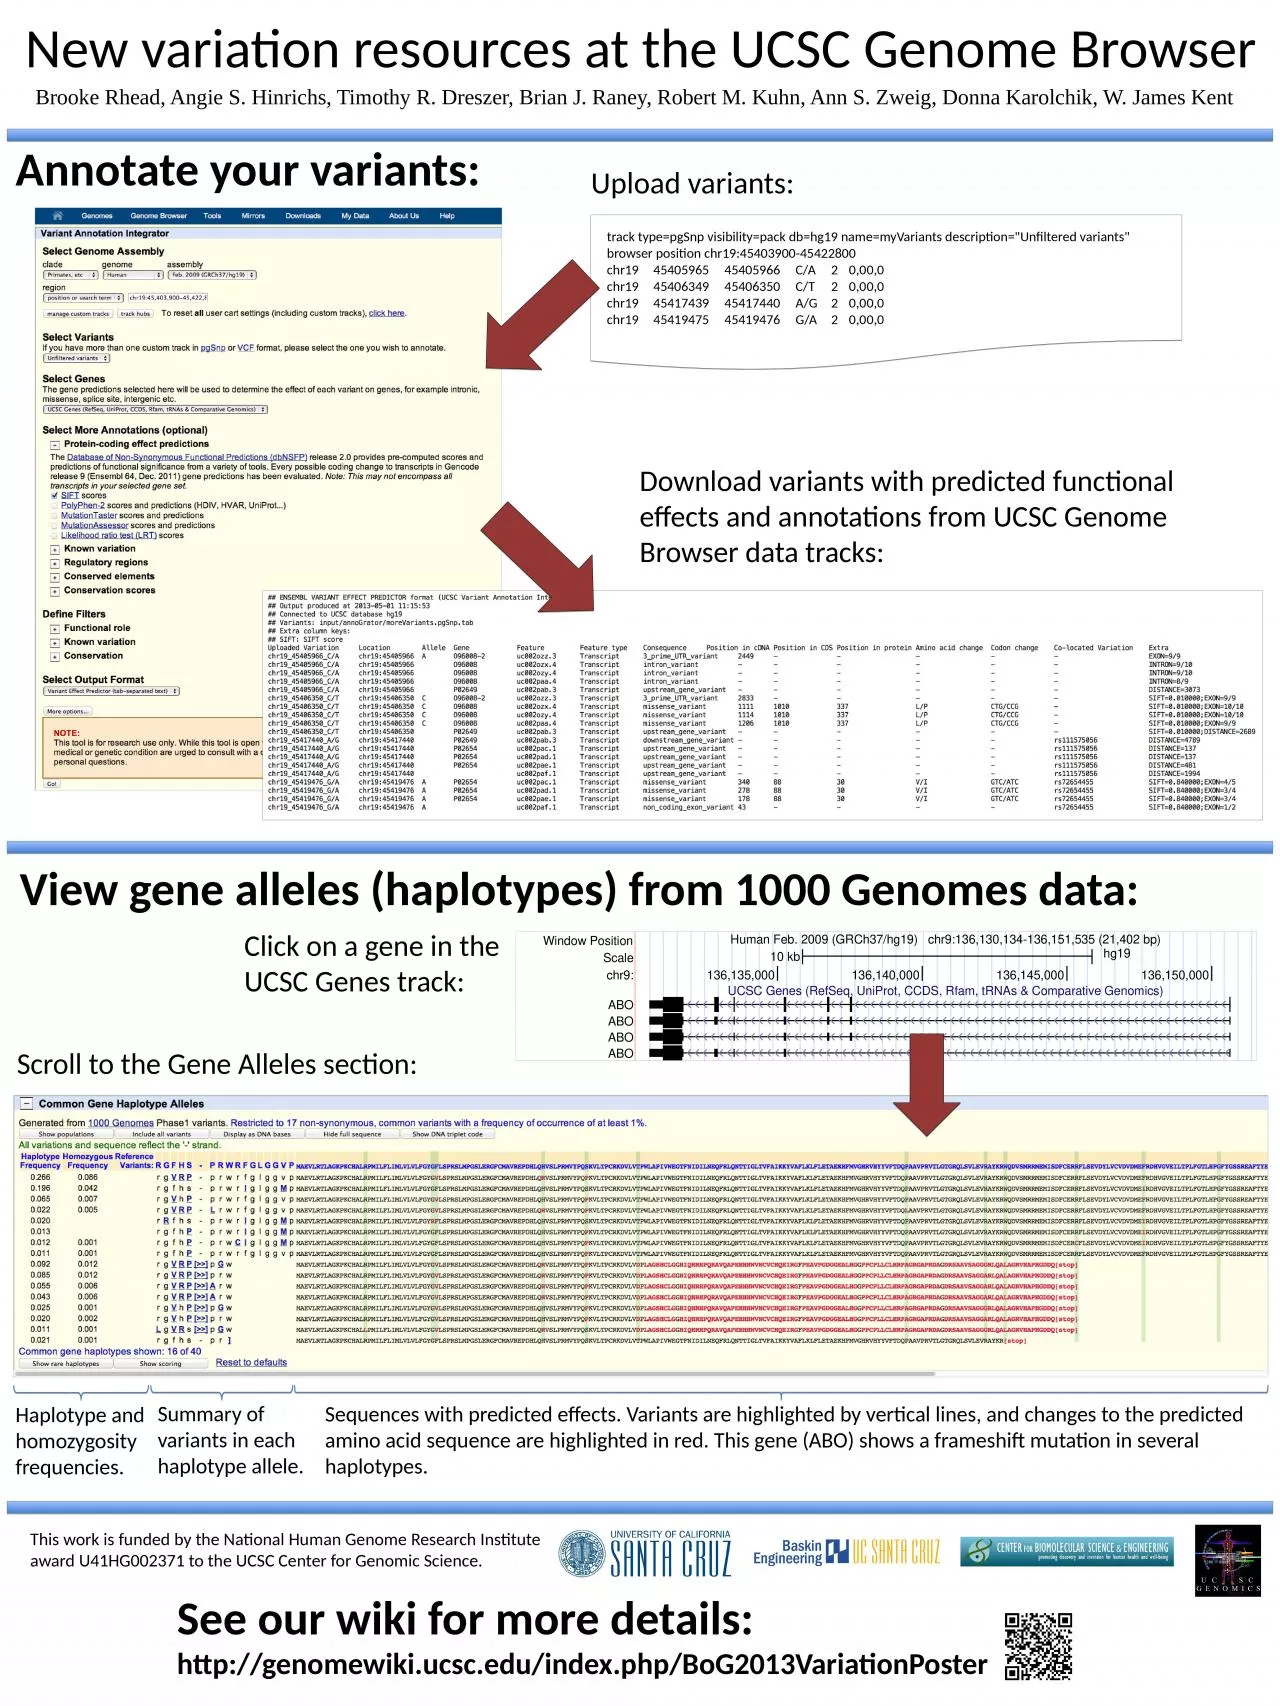 New variation resources at the UCSC Genome Browser